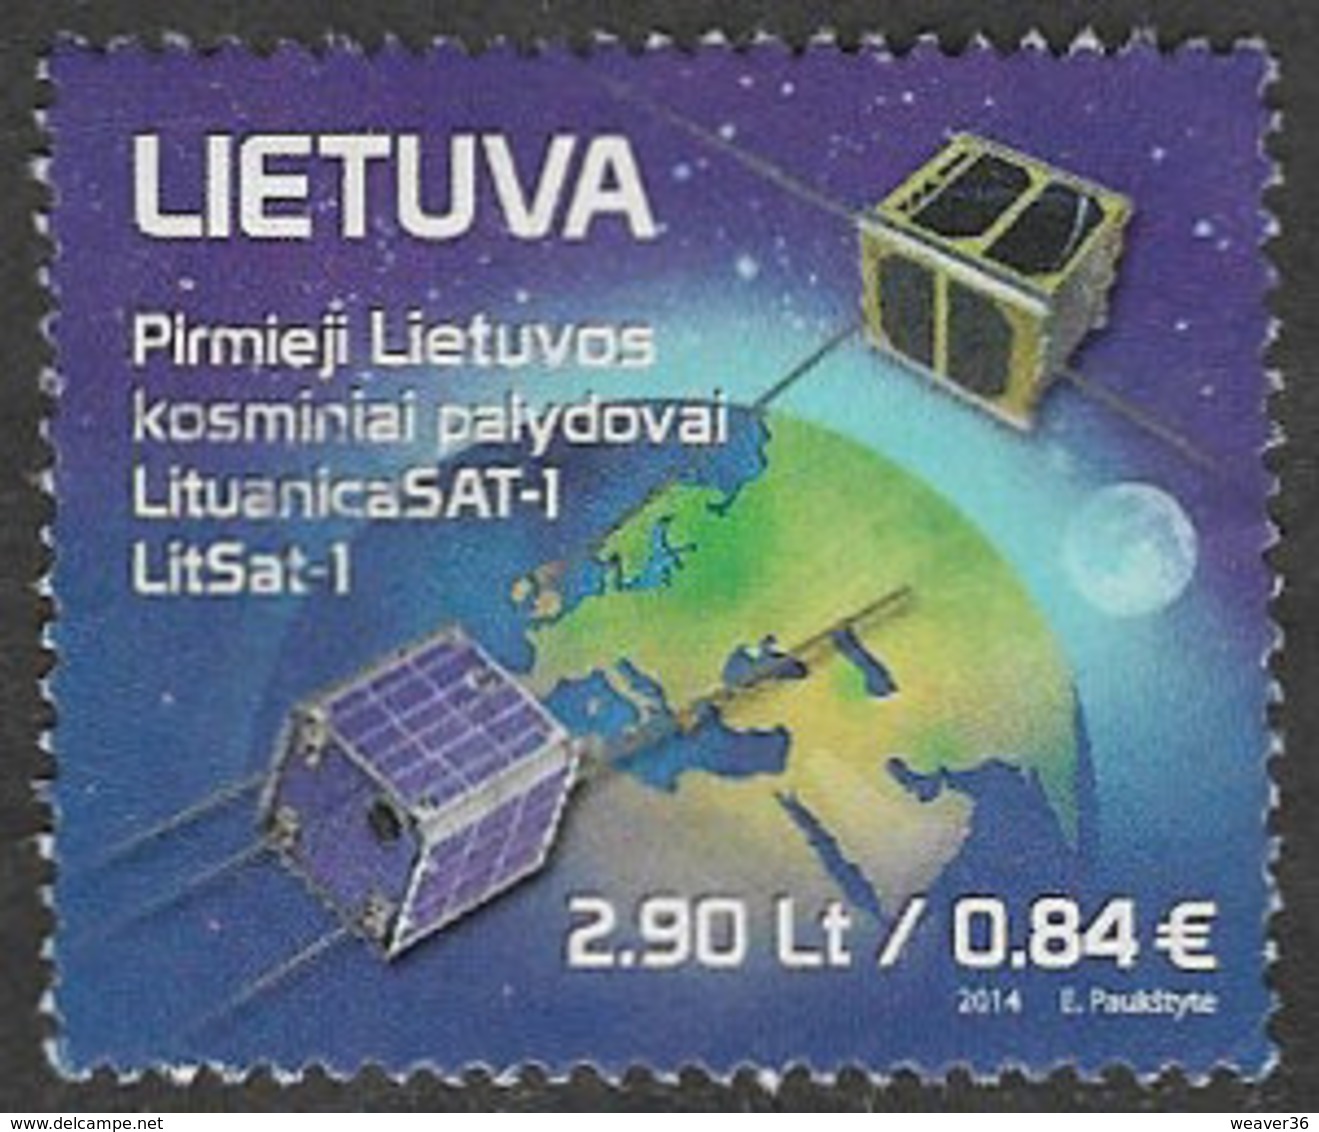 Lithuania 2014 First Satellite 2l.90 Good/fine Used [38/31519/ND] - Lithuania